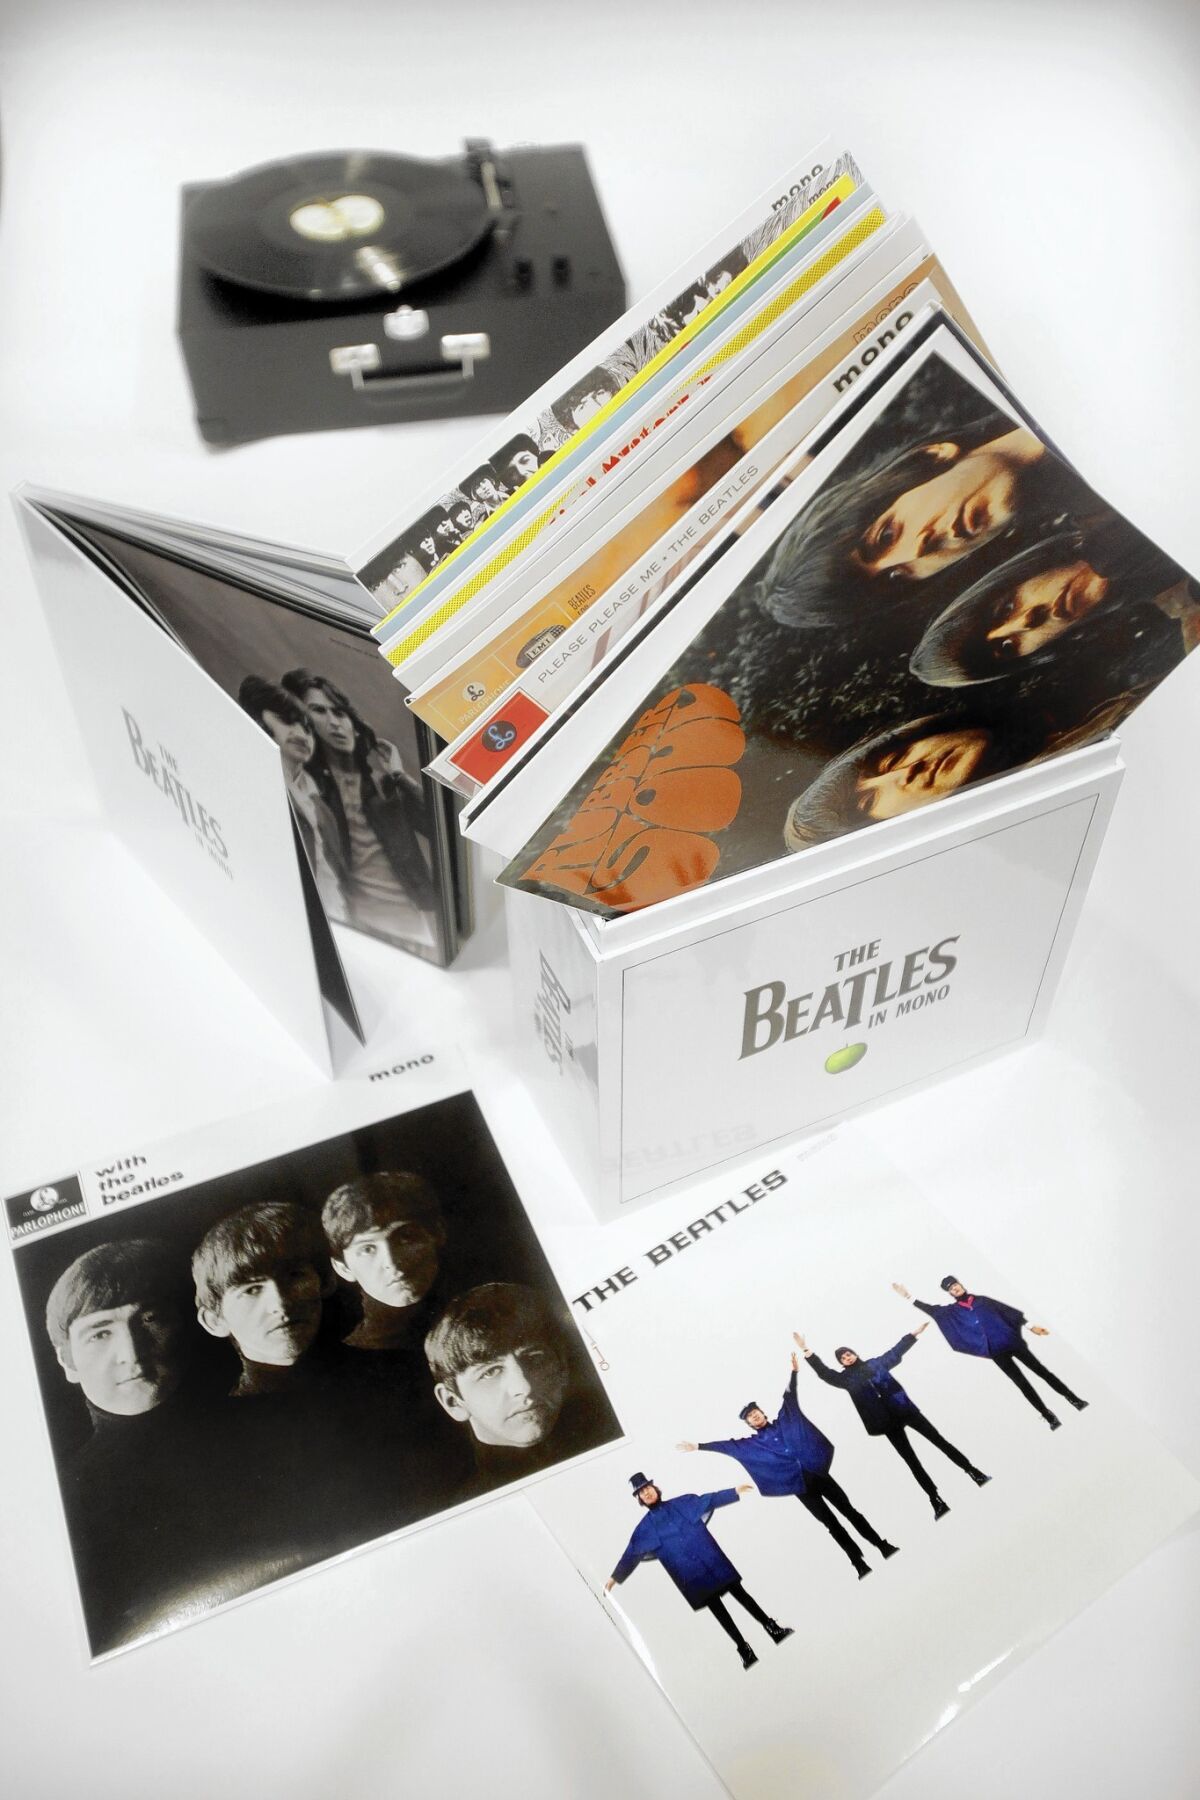 The Beatles' complete mono catalog on vinyl LPs - Los Angeles Times